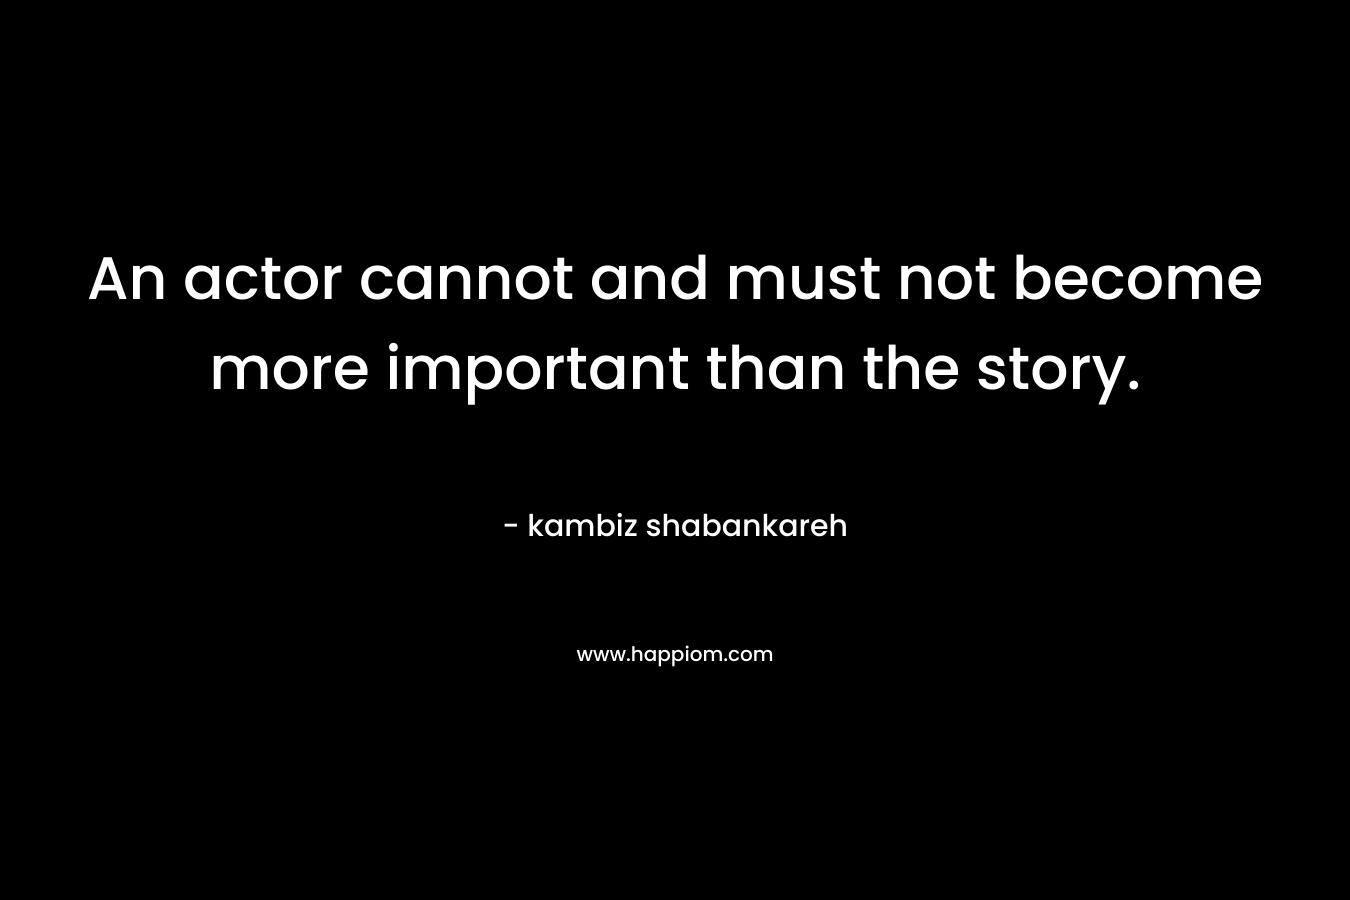 An actor cannot and must not become more important than the story.